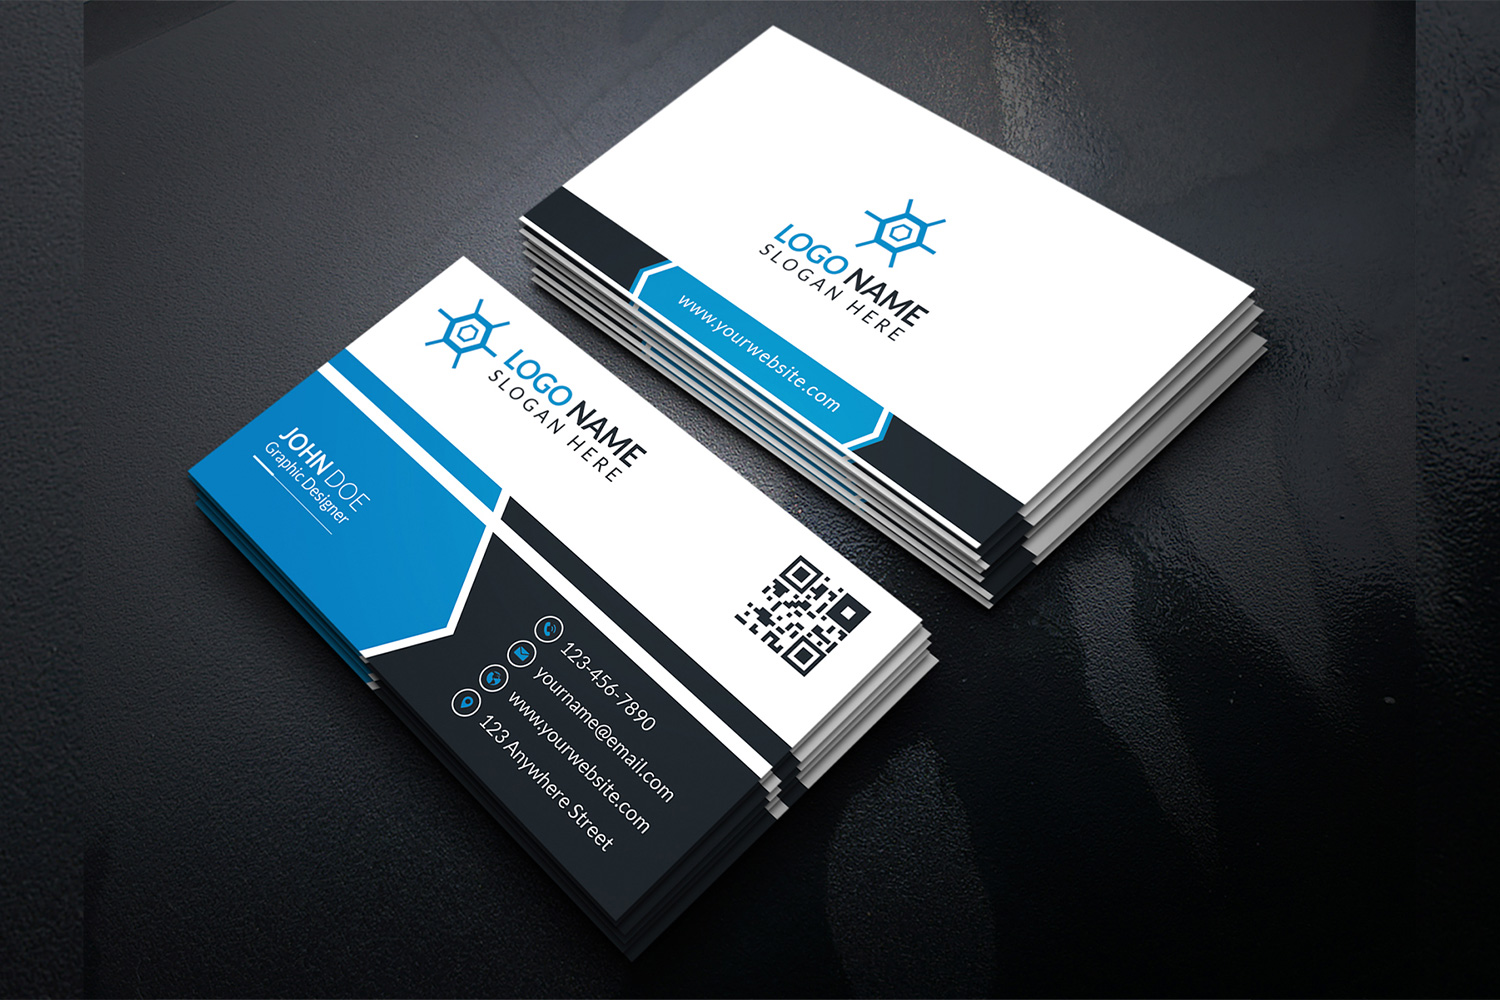 Light business card with blue elements.